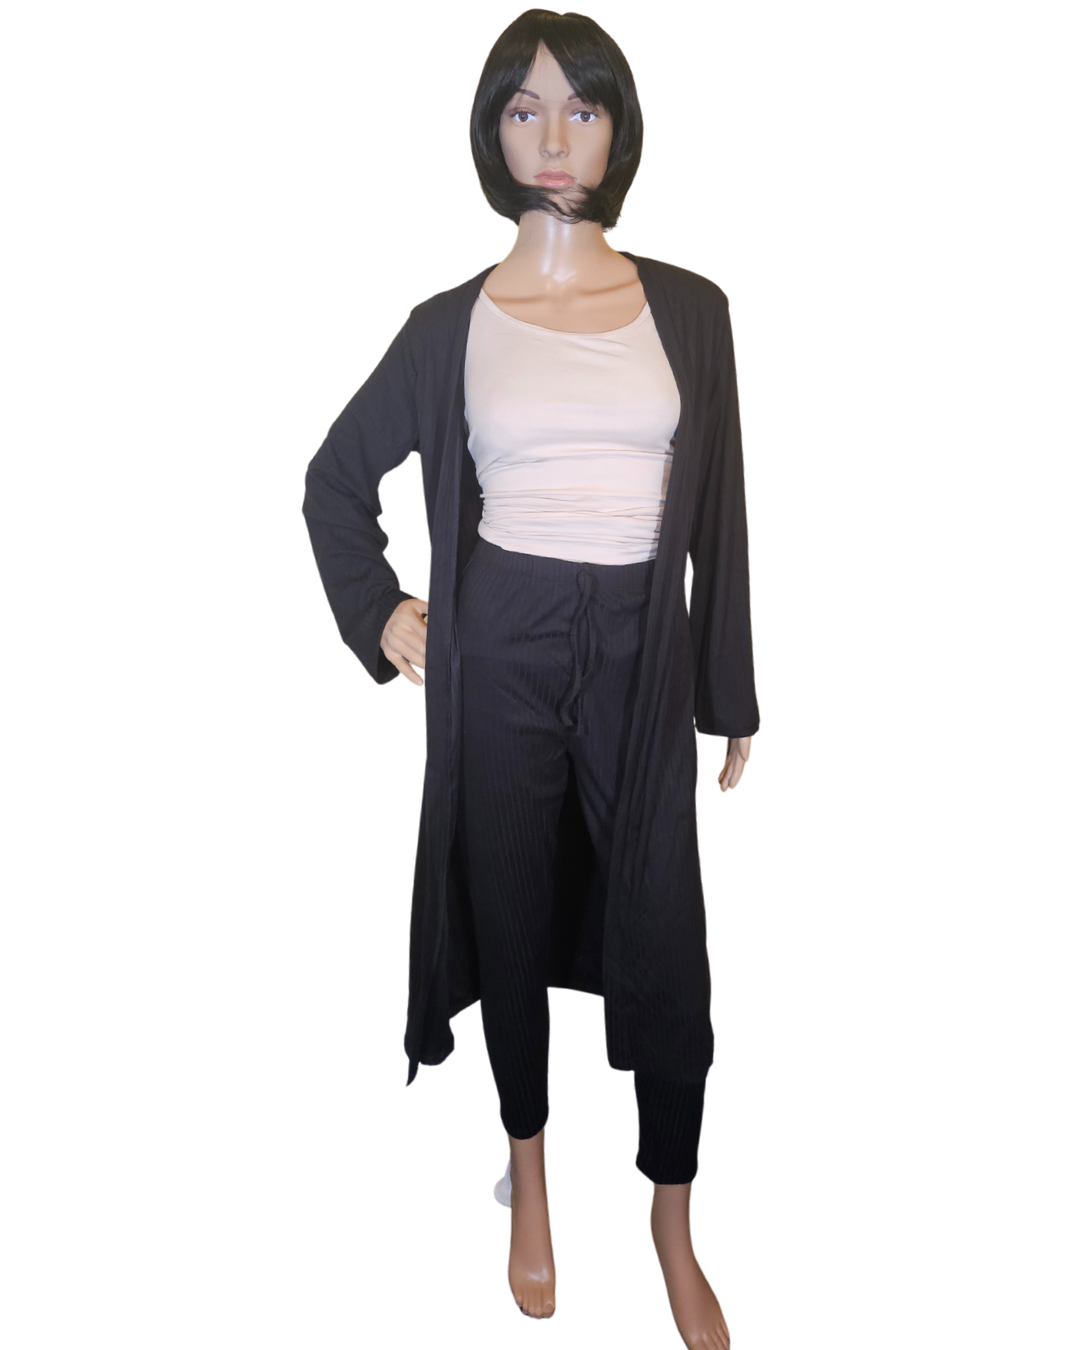 Small-Large in size. black 2 pc cardigan set. the pants are legging pants with a decorative string in the front.